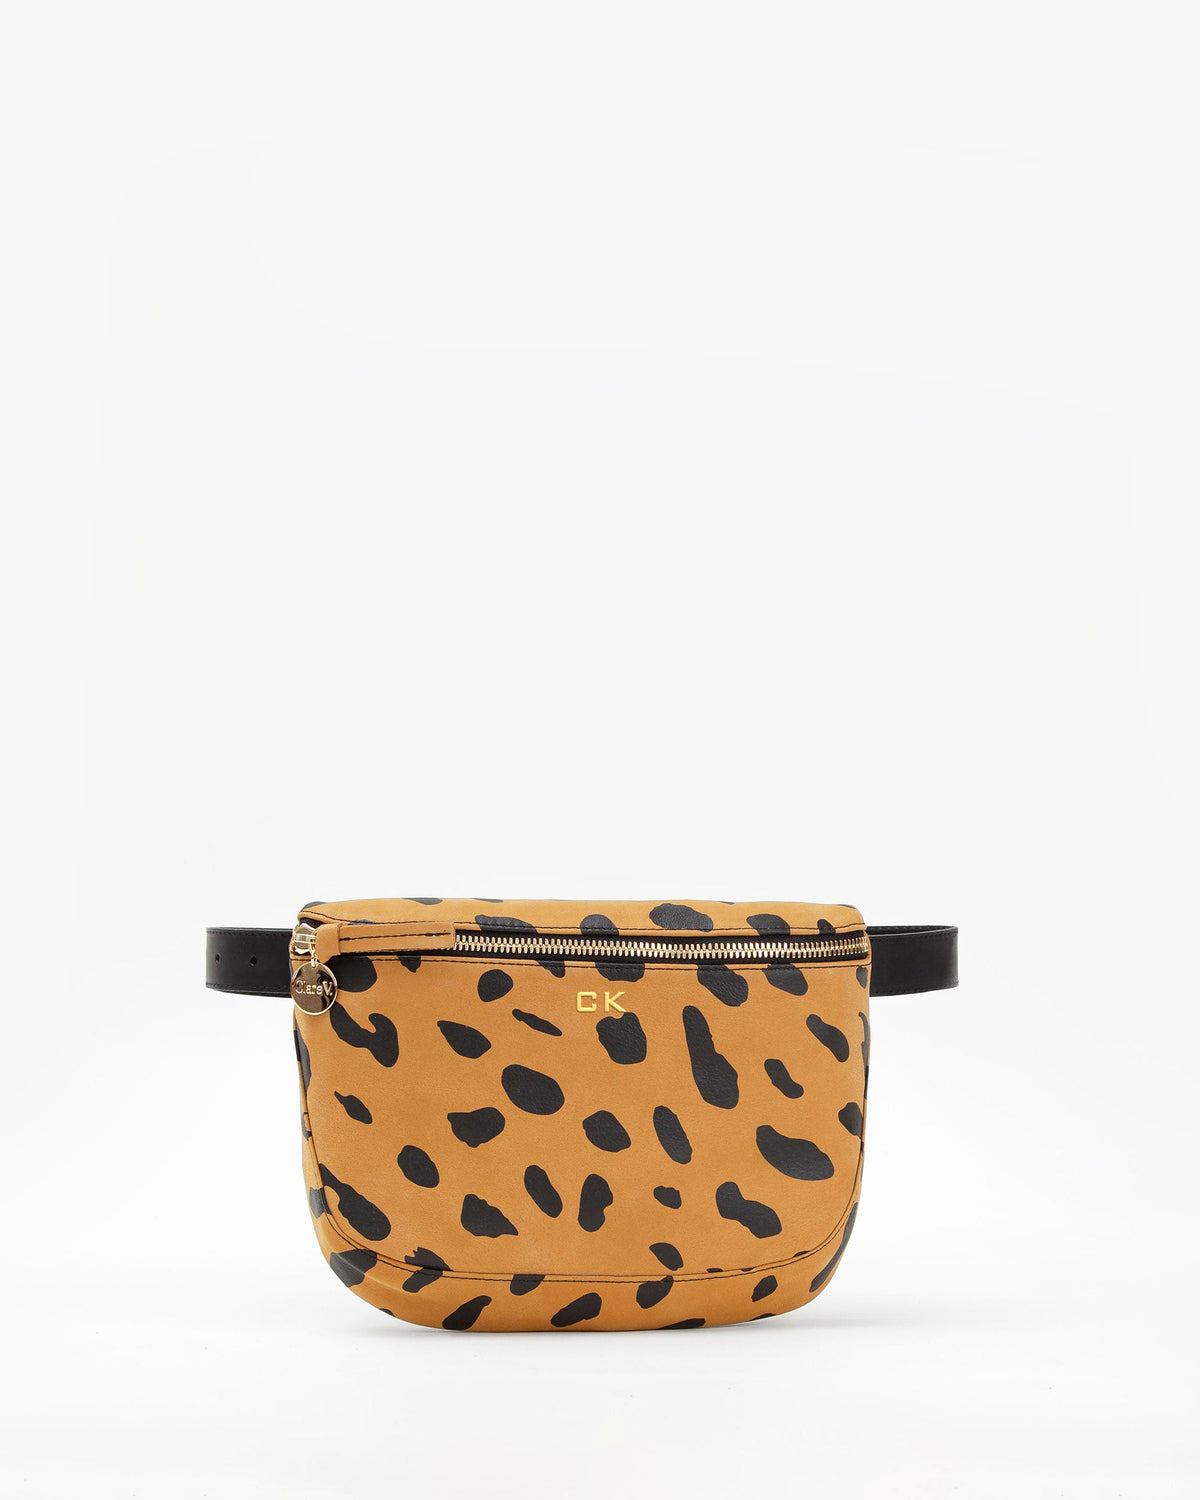 Jaguar Fanny Pack with Gold Foil Monogram with Short Letters and Top Center Placement